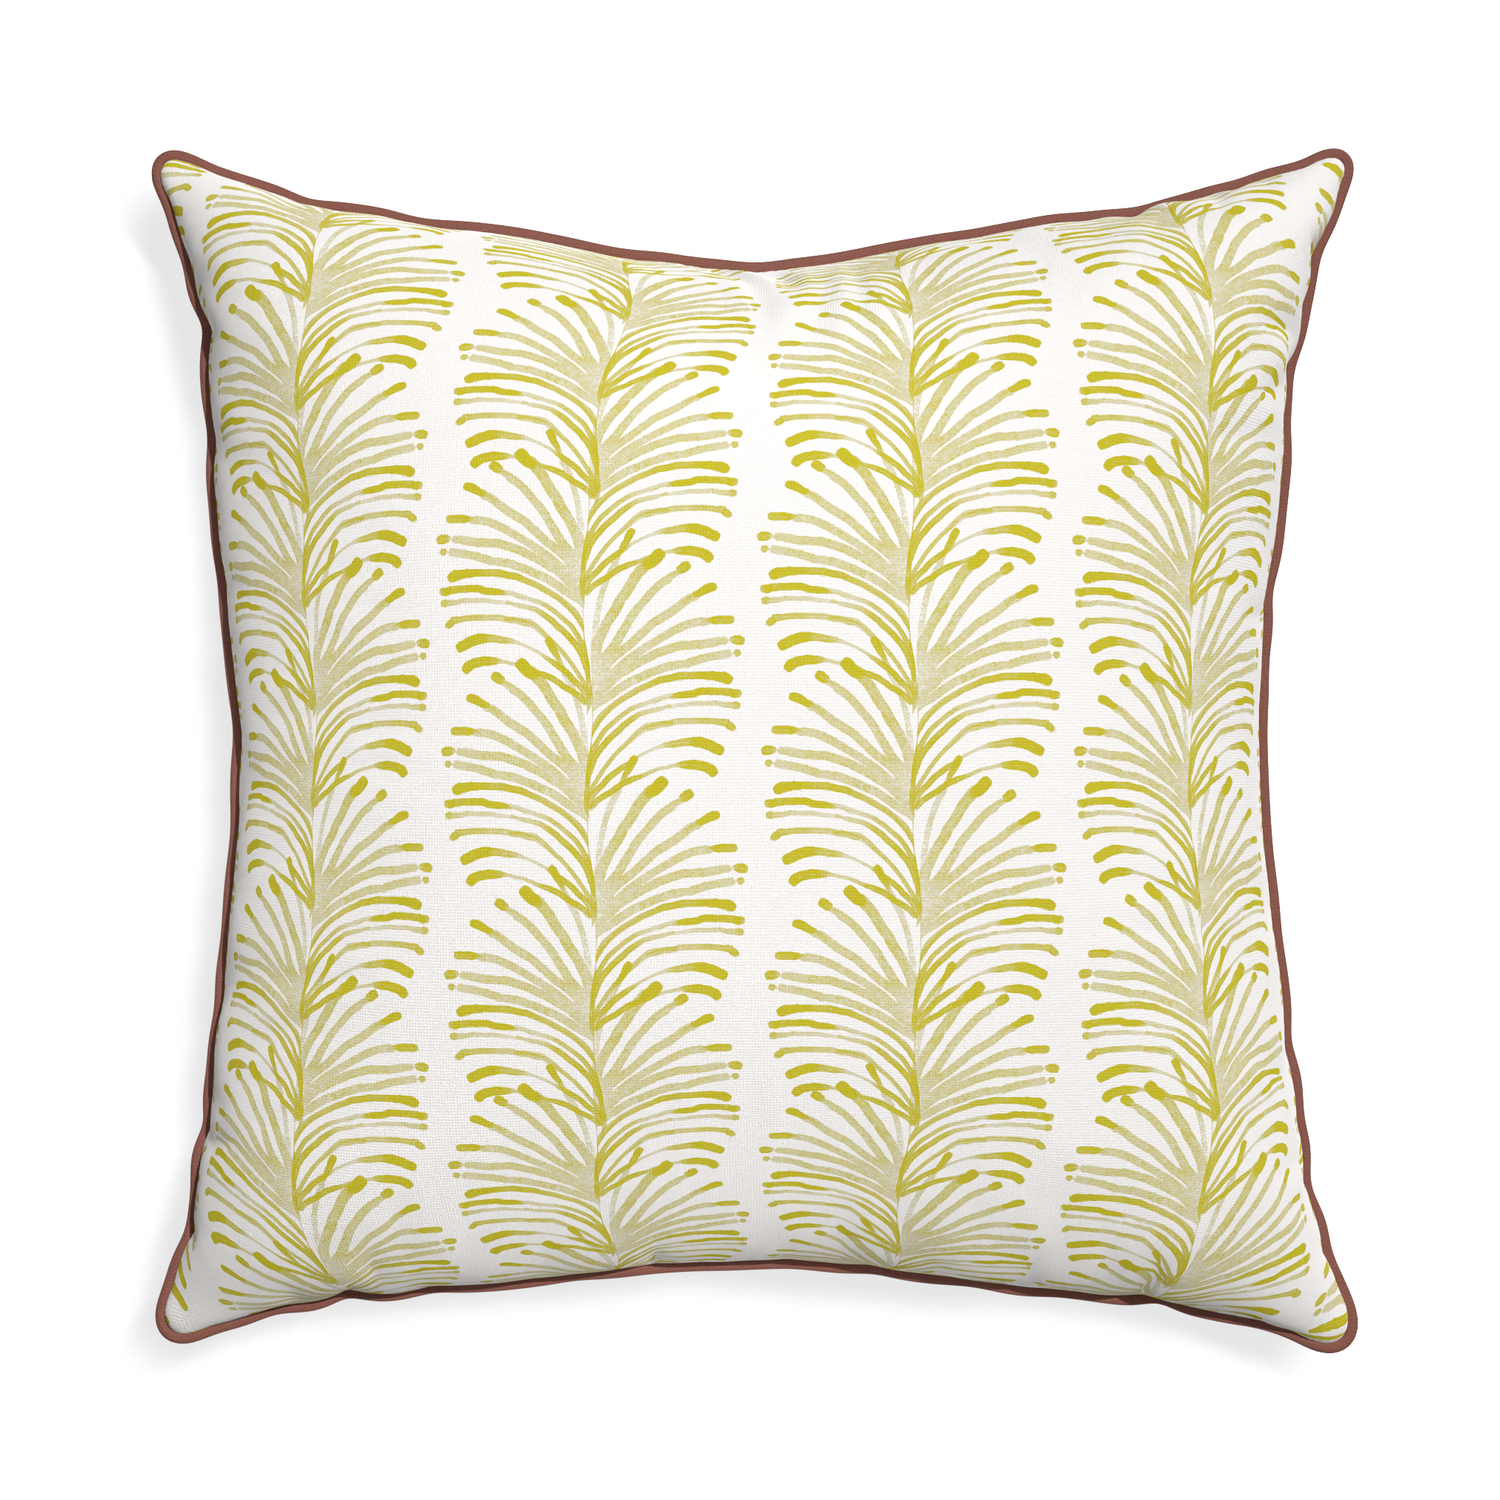 Euro-sham emma chartreuse custom pillow with w piping on white background